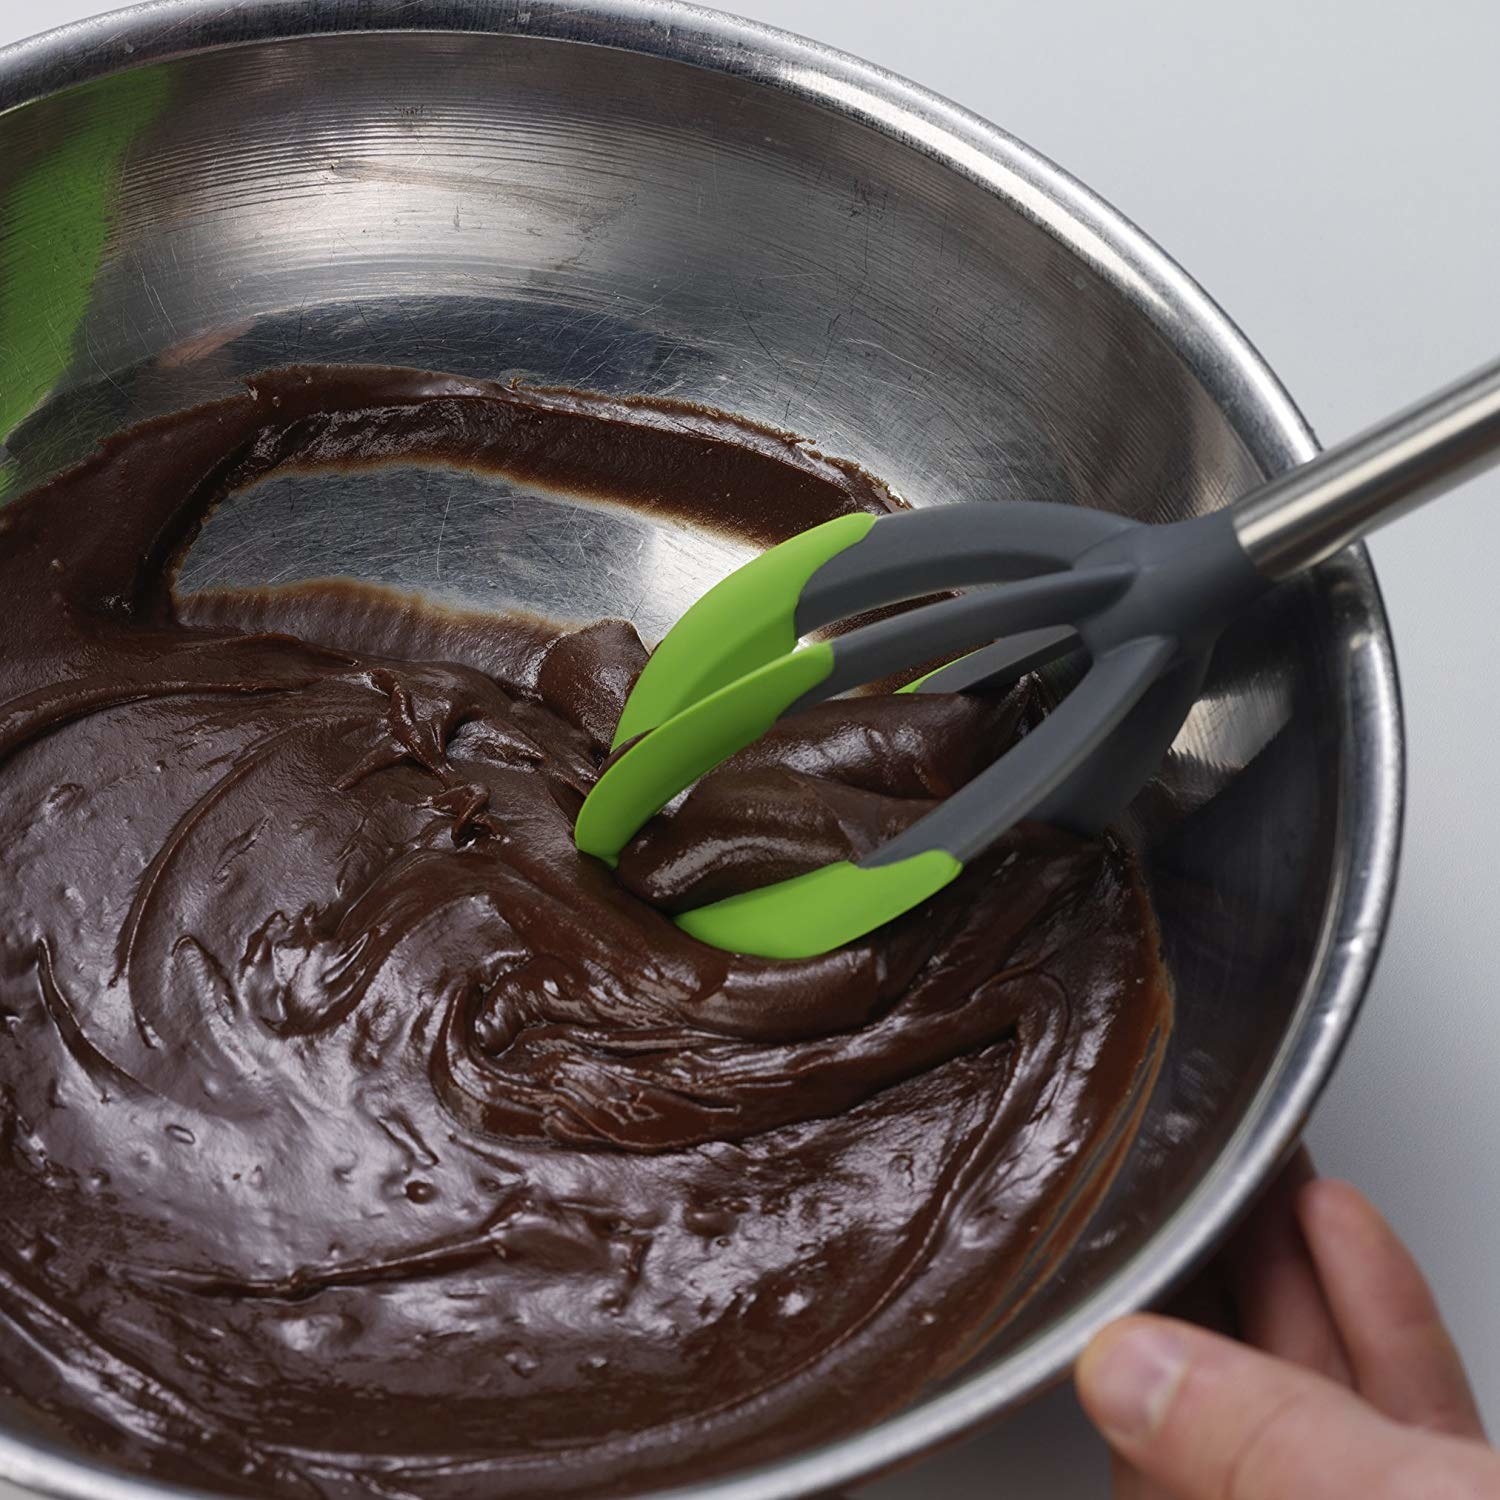 The batter tool being used to stir brownie batter